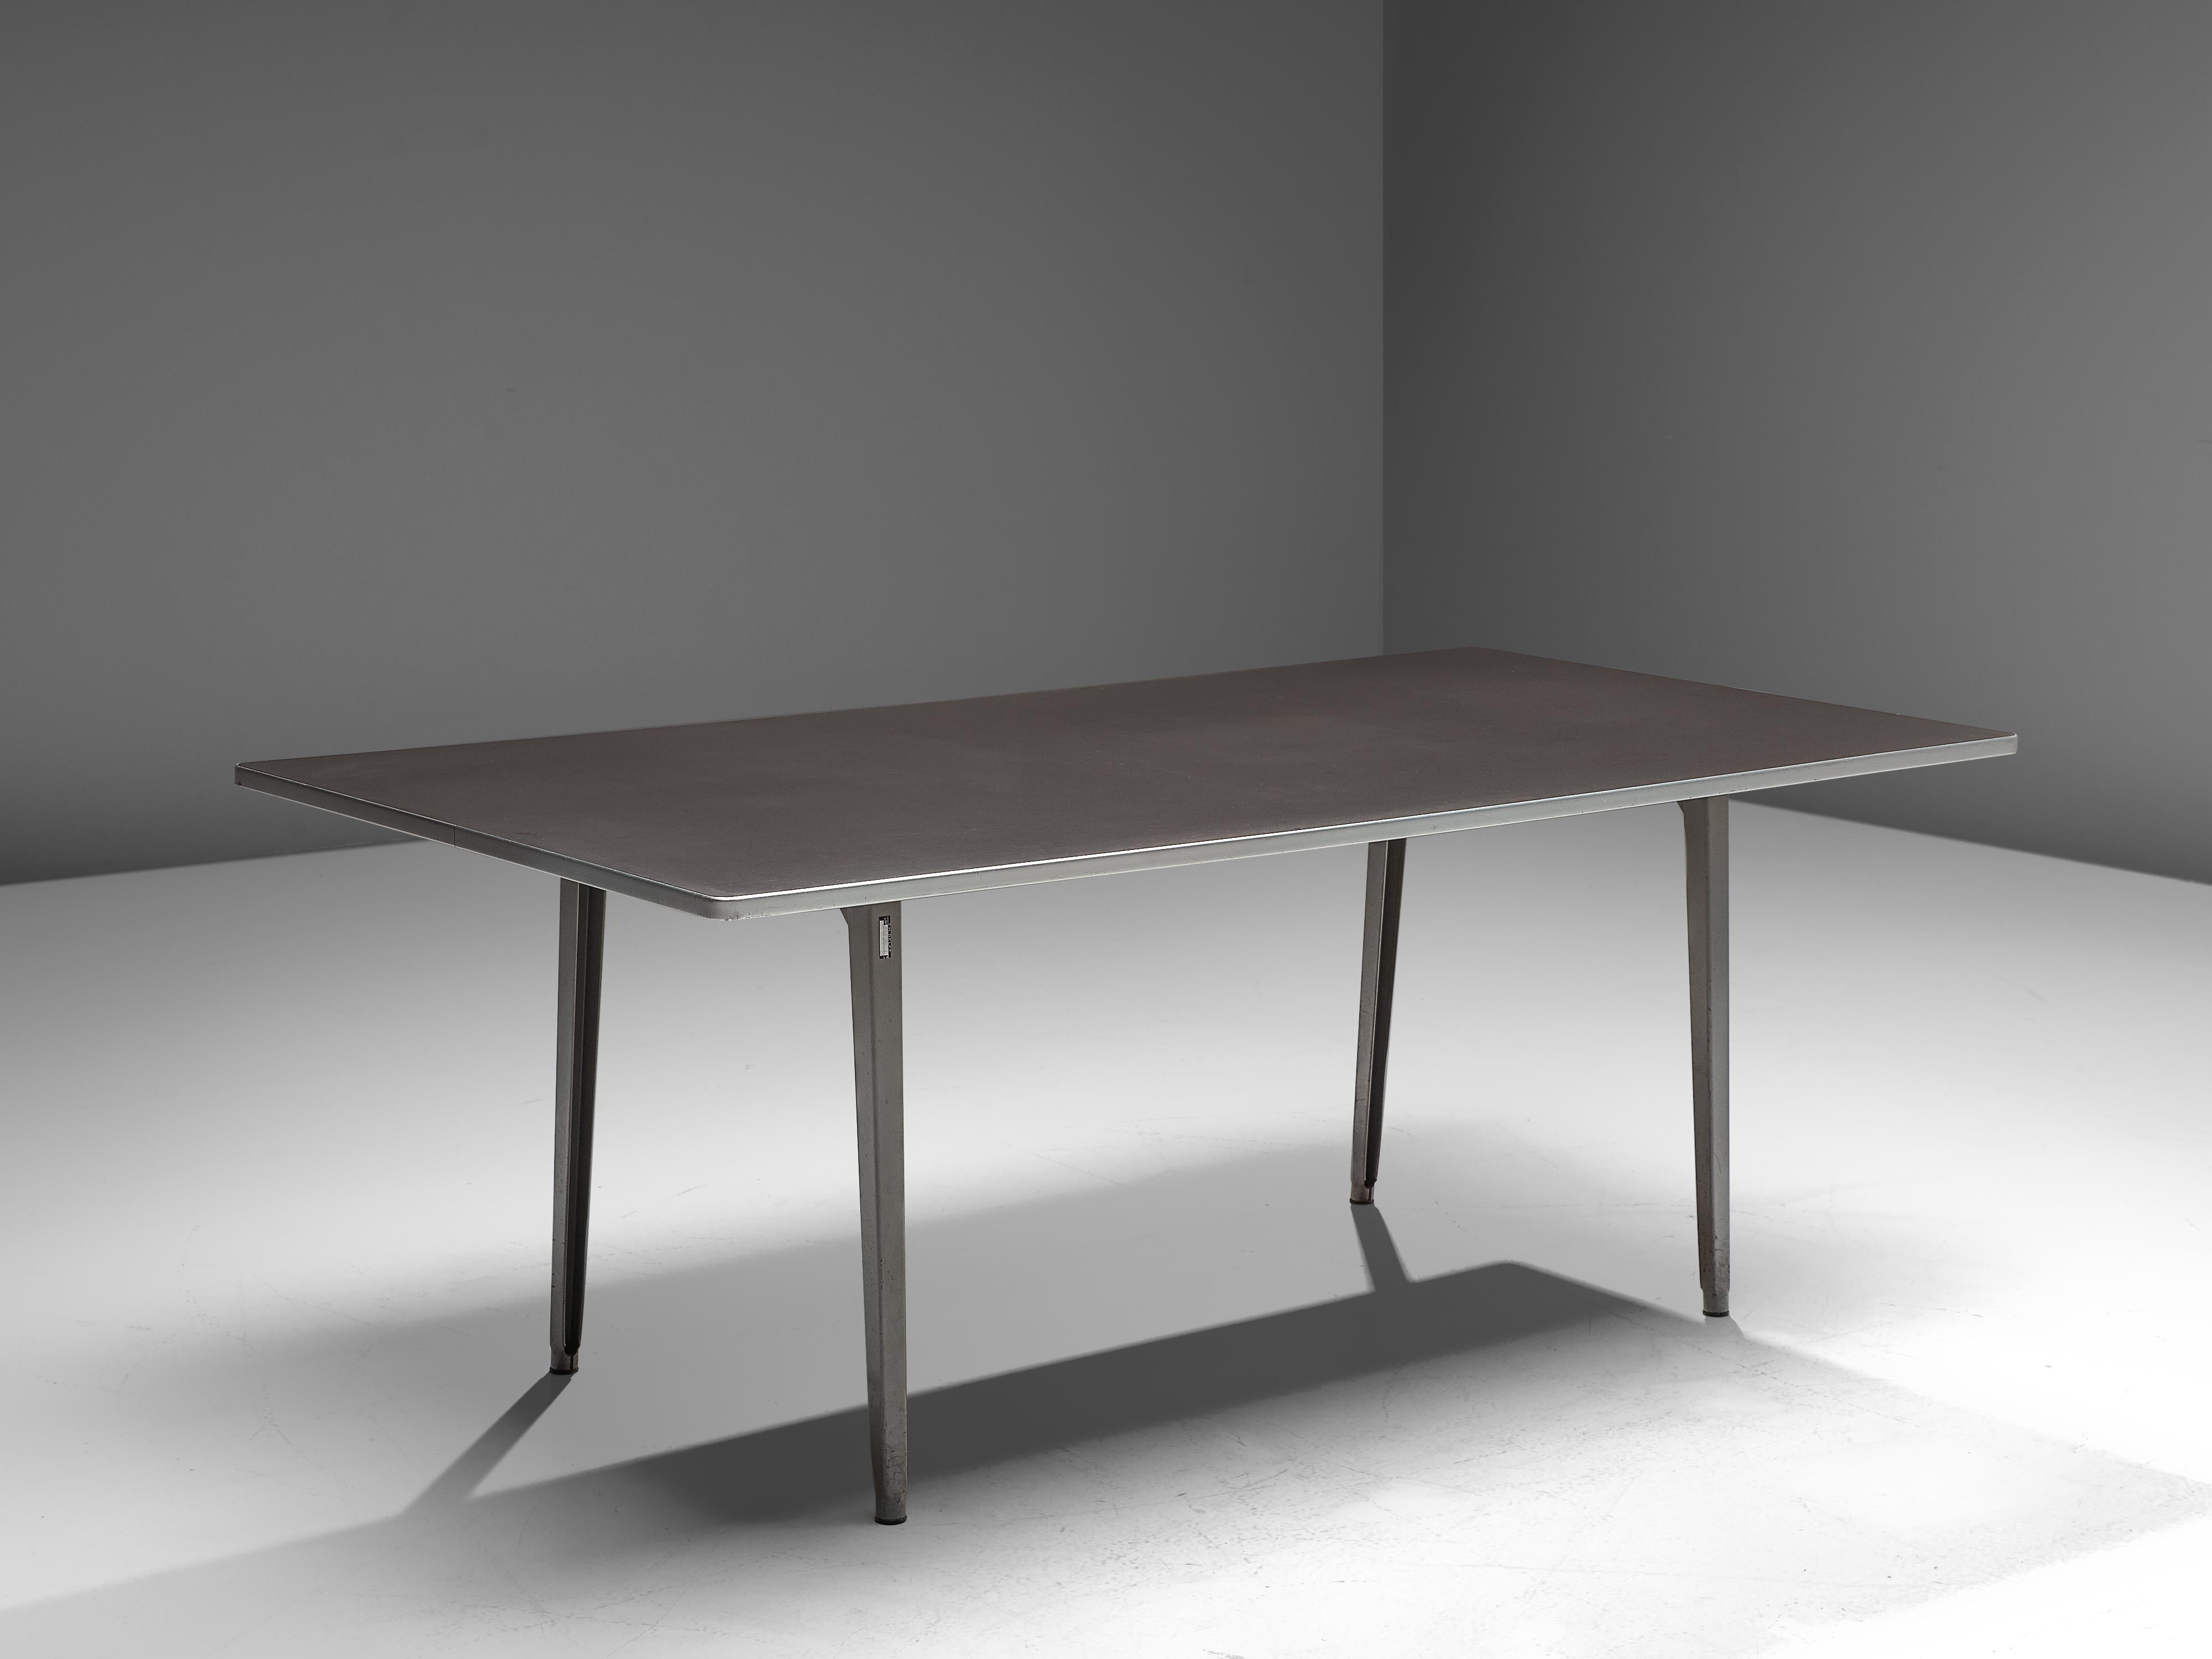 Friso Kramer for TH delft, dining table, metal, The Netherlands, 1940s. 

This work table is designed by Friso Kramer in the 1940s. The table features a modest design, with slightly tapered legs that are tilted. This table is an example of the